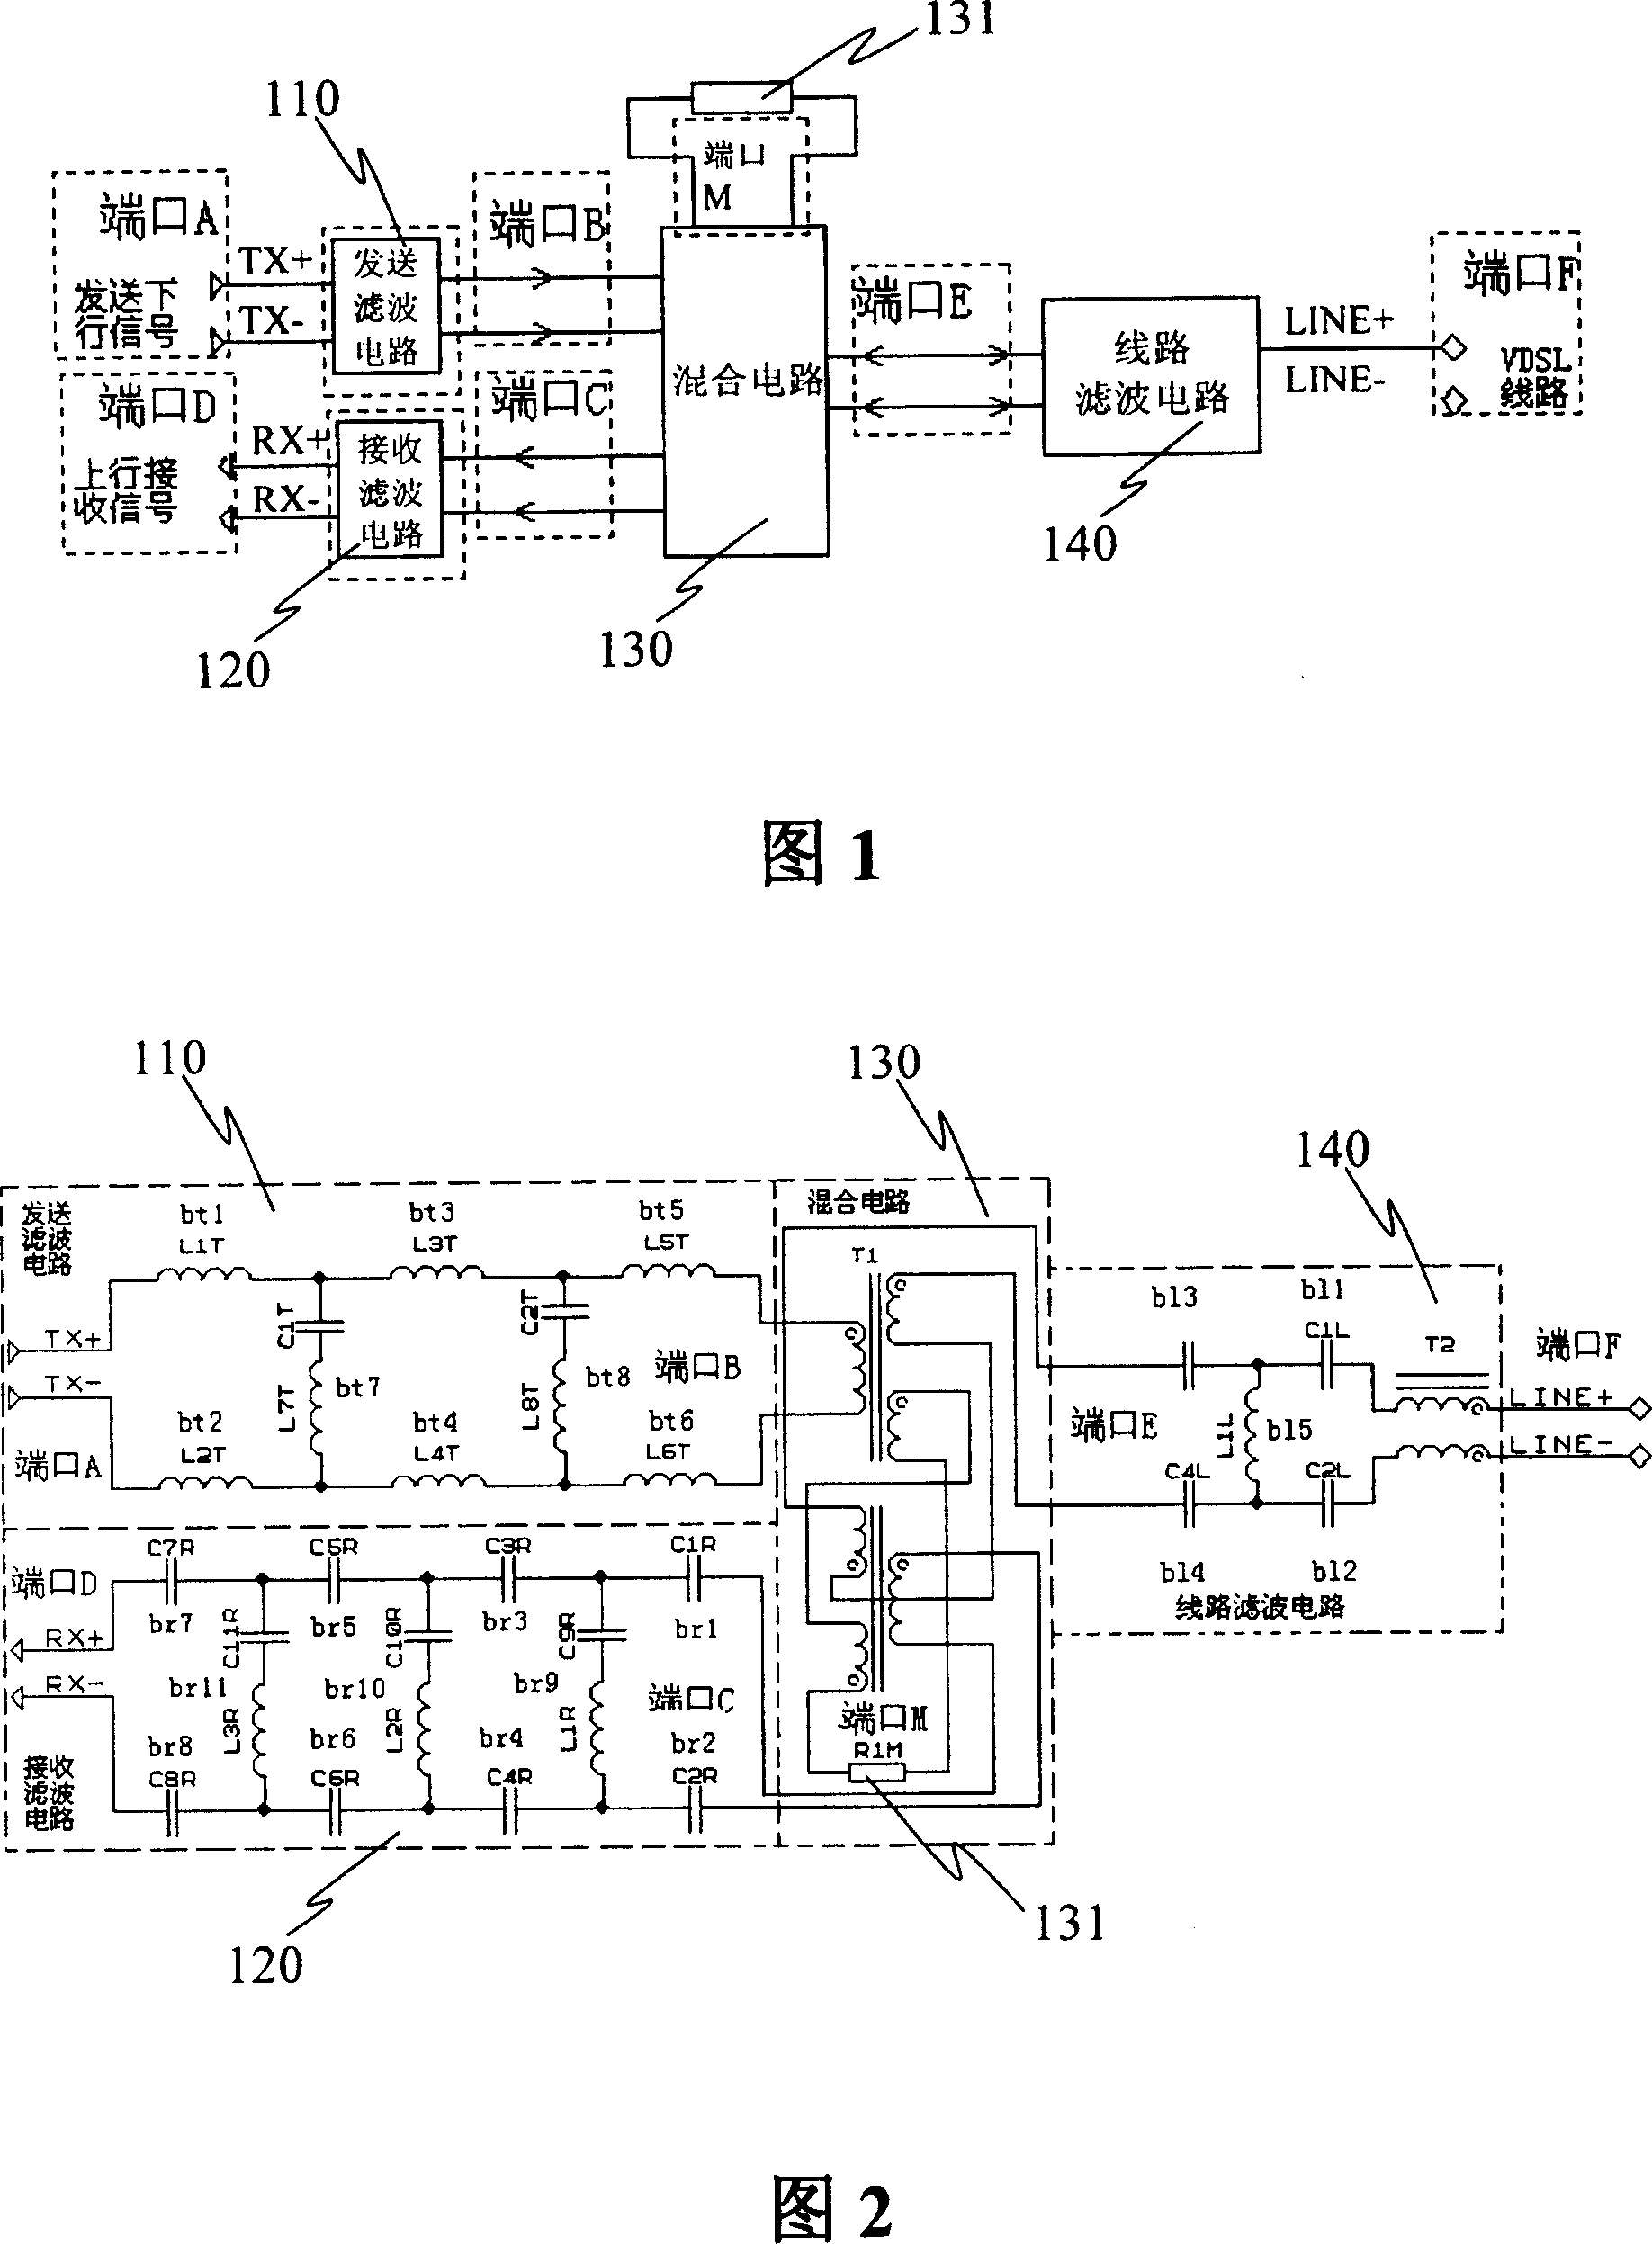 Filtering circuit for very high bit-rate digital subscriber line